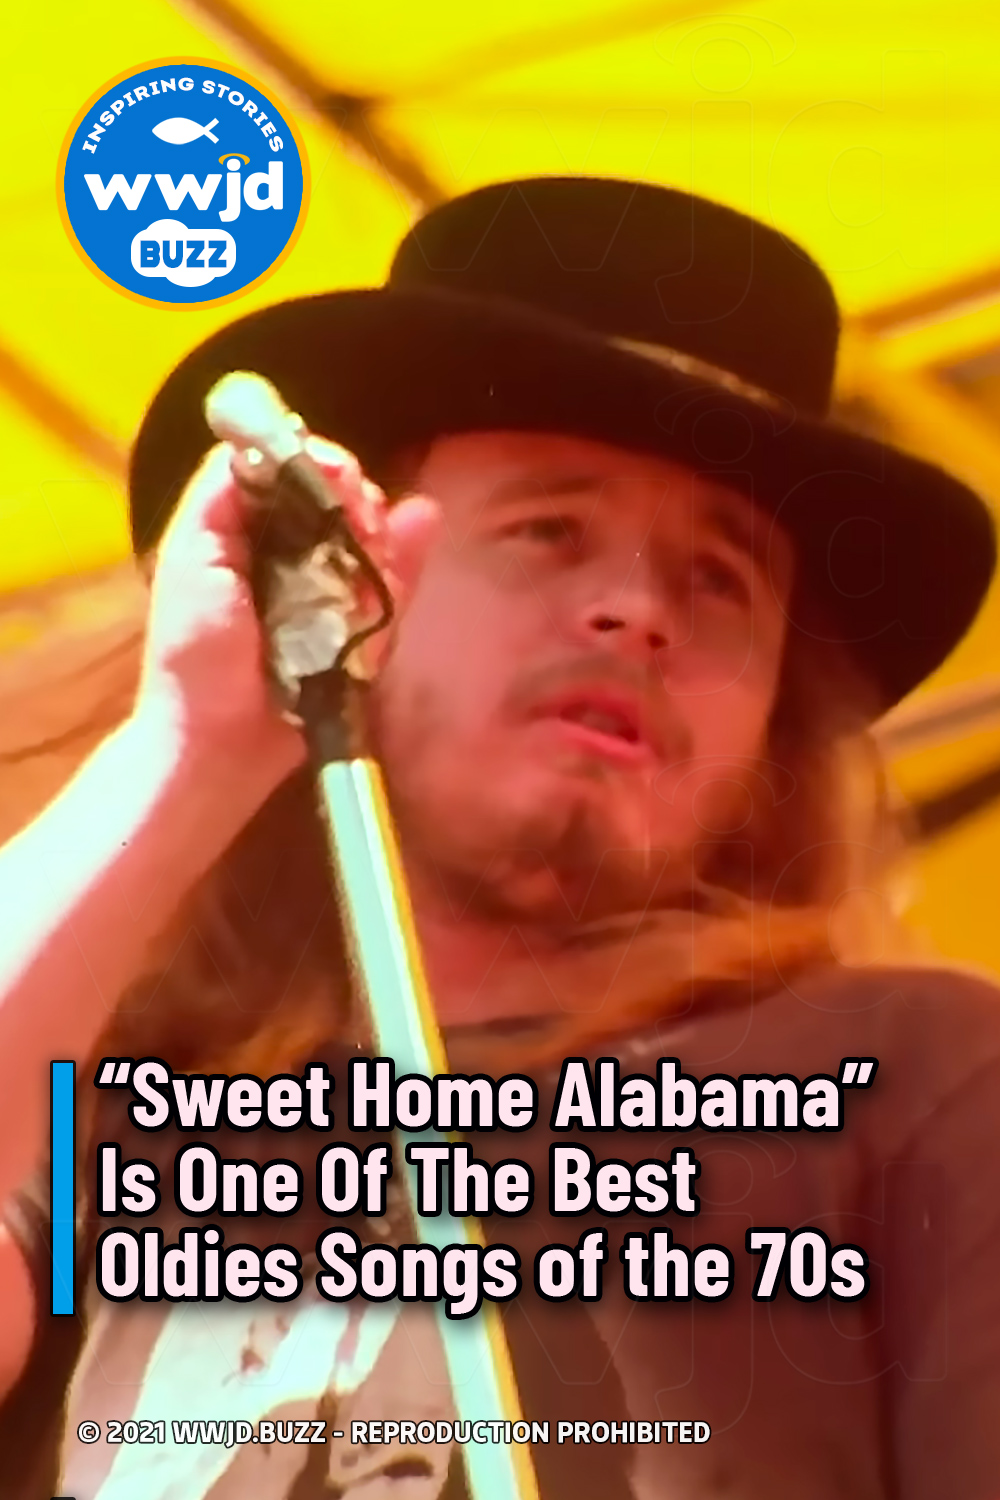 “Sweet Home Alabama” Is One Of The Best Oldies Songs of the 70s